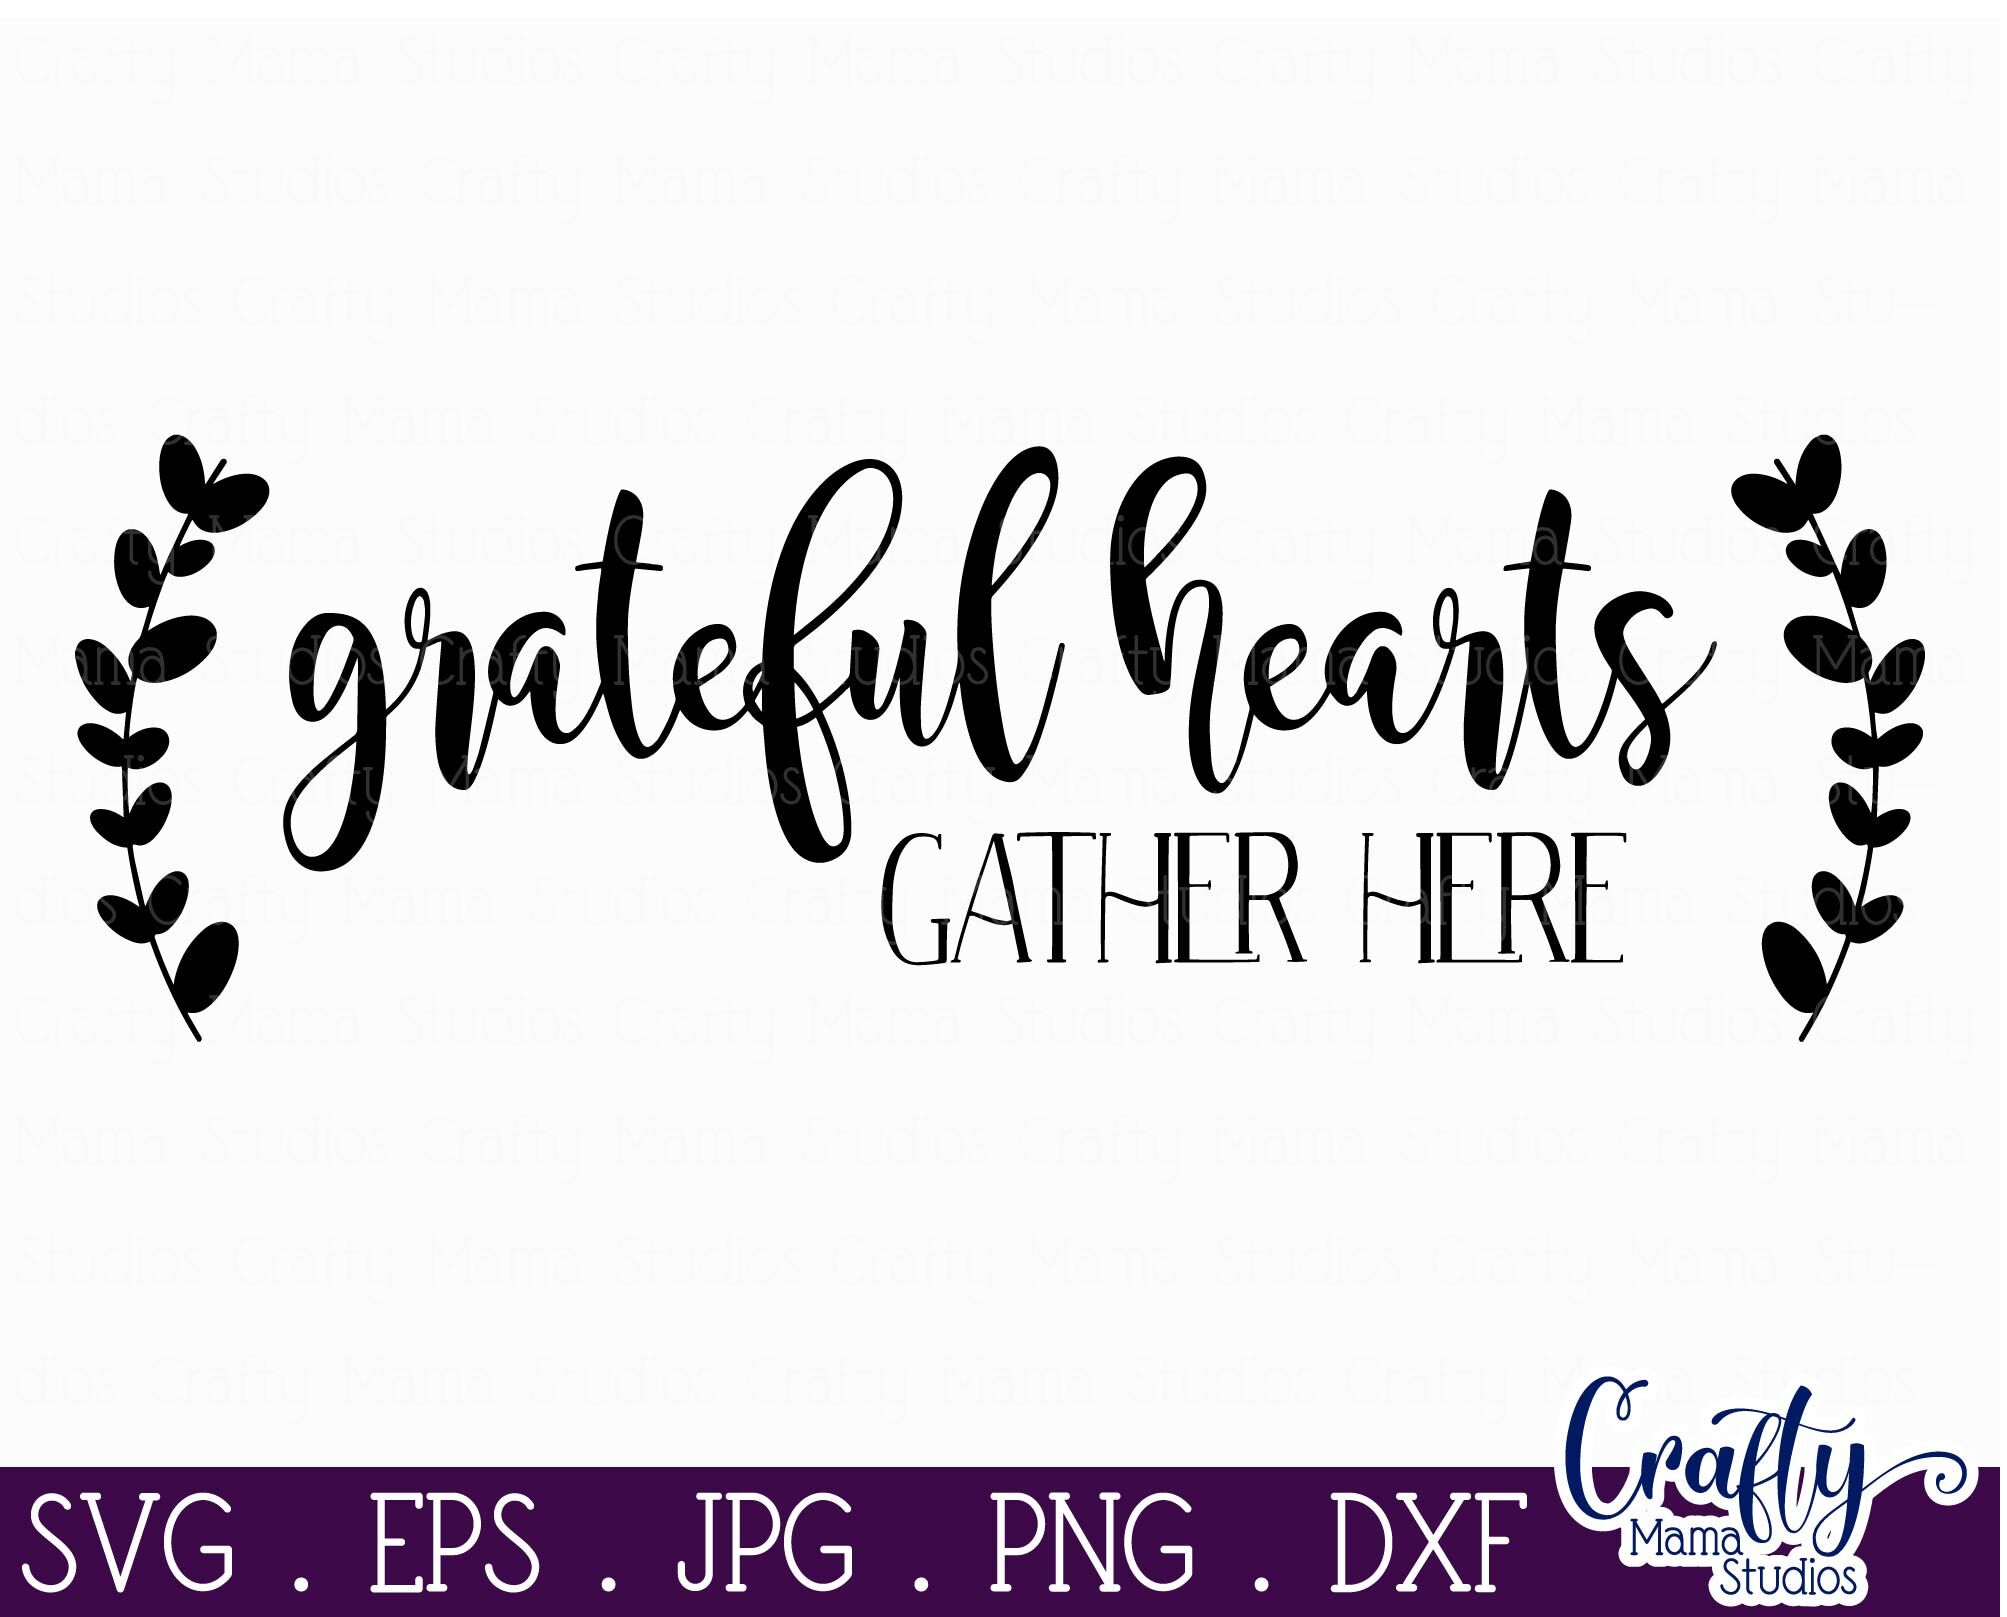 Download Family Svg - Love Svg - Home Svg - Grateful Hearts Gather Here SVG By Crafty Mama Studios ...